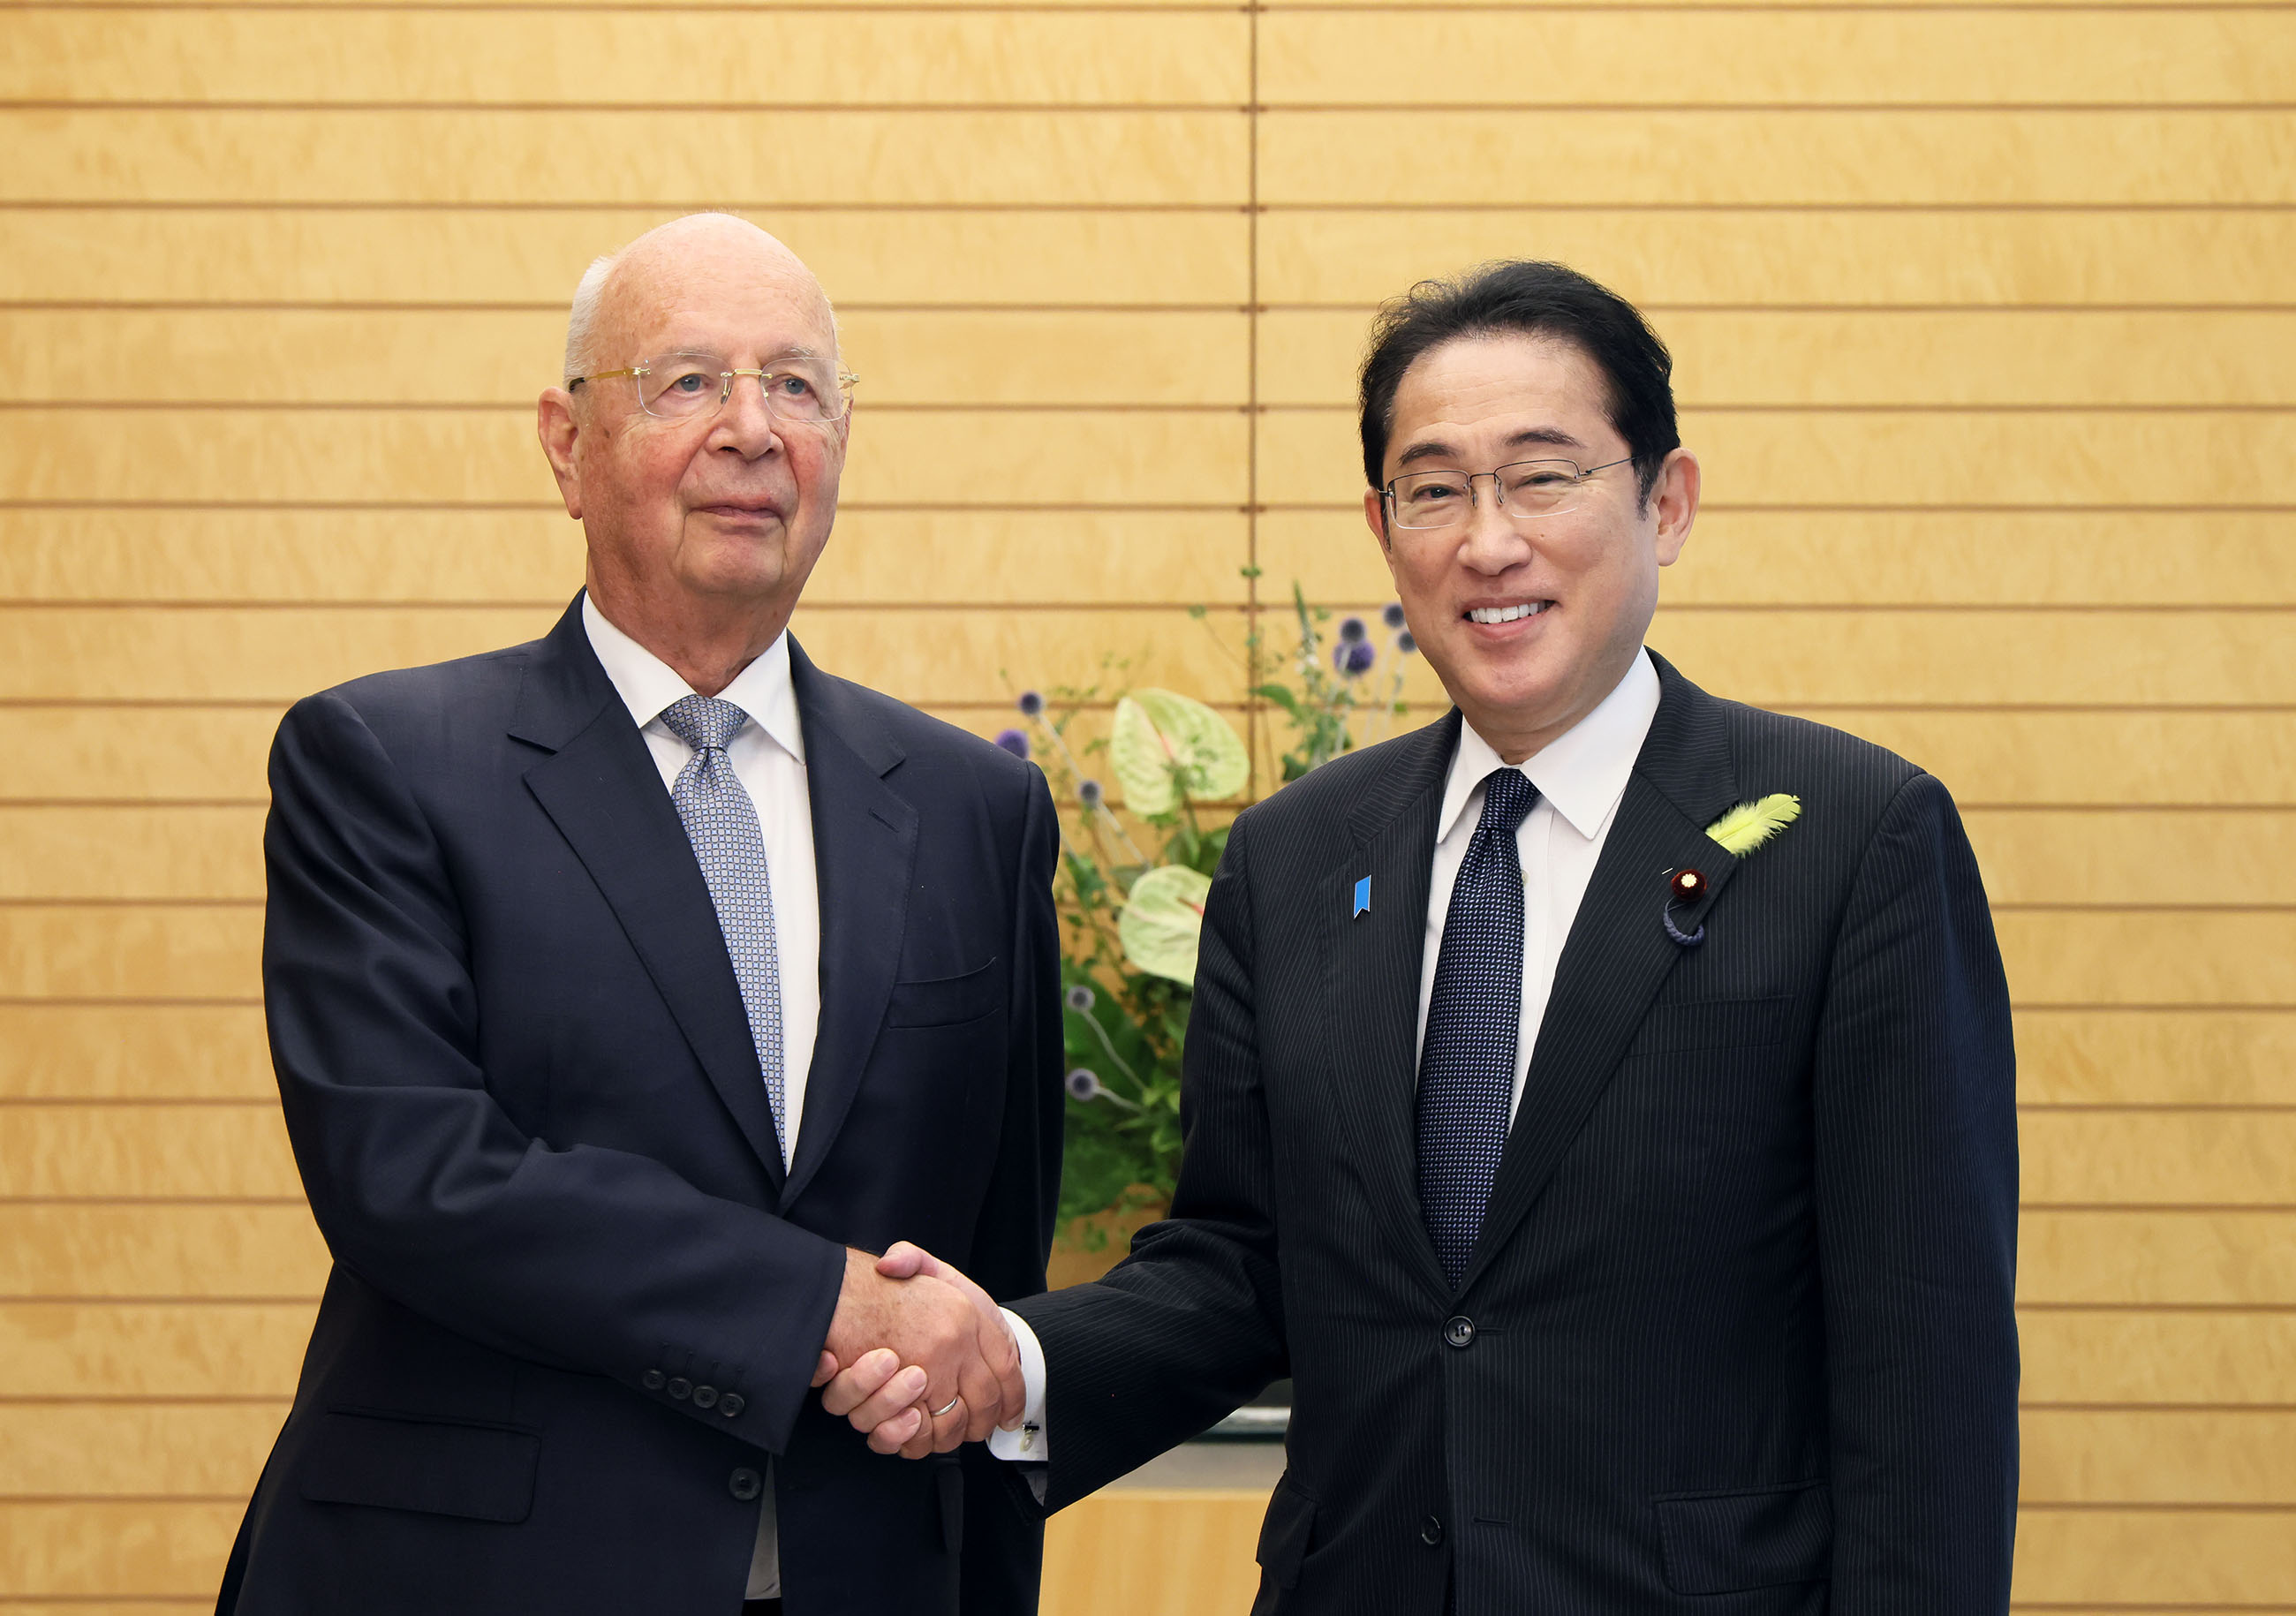 Courtesy Call from WEF Chairman Klaus Schwab